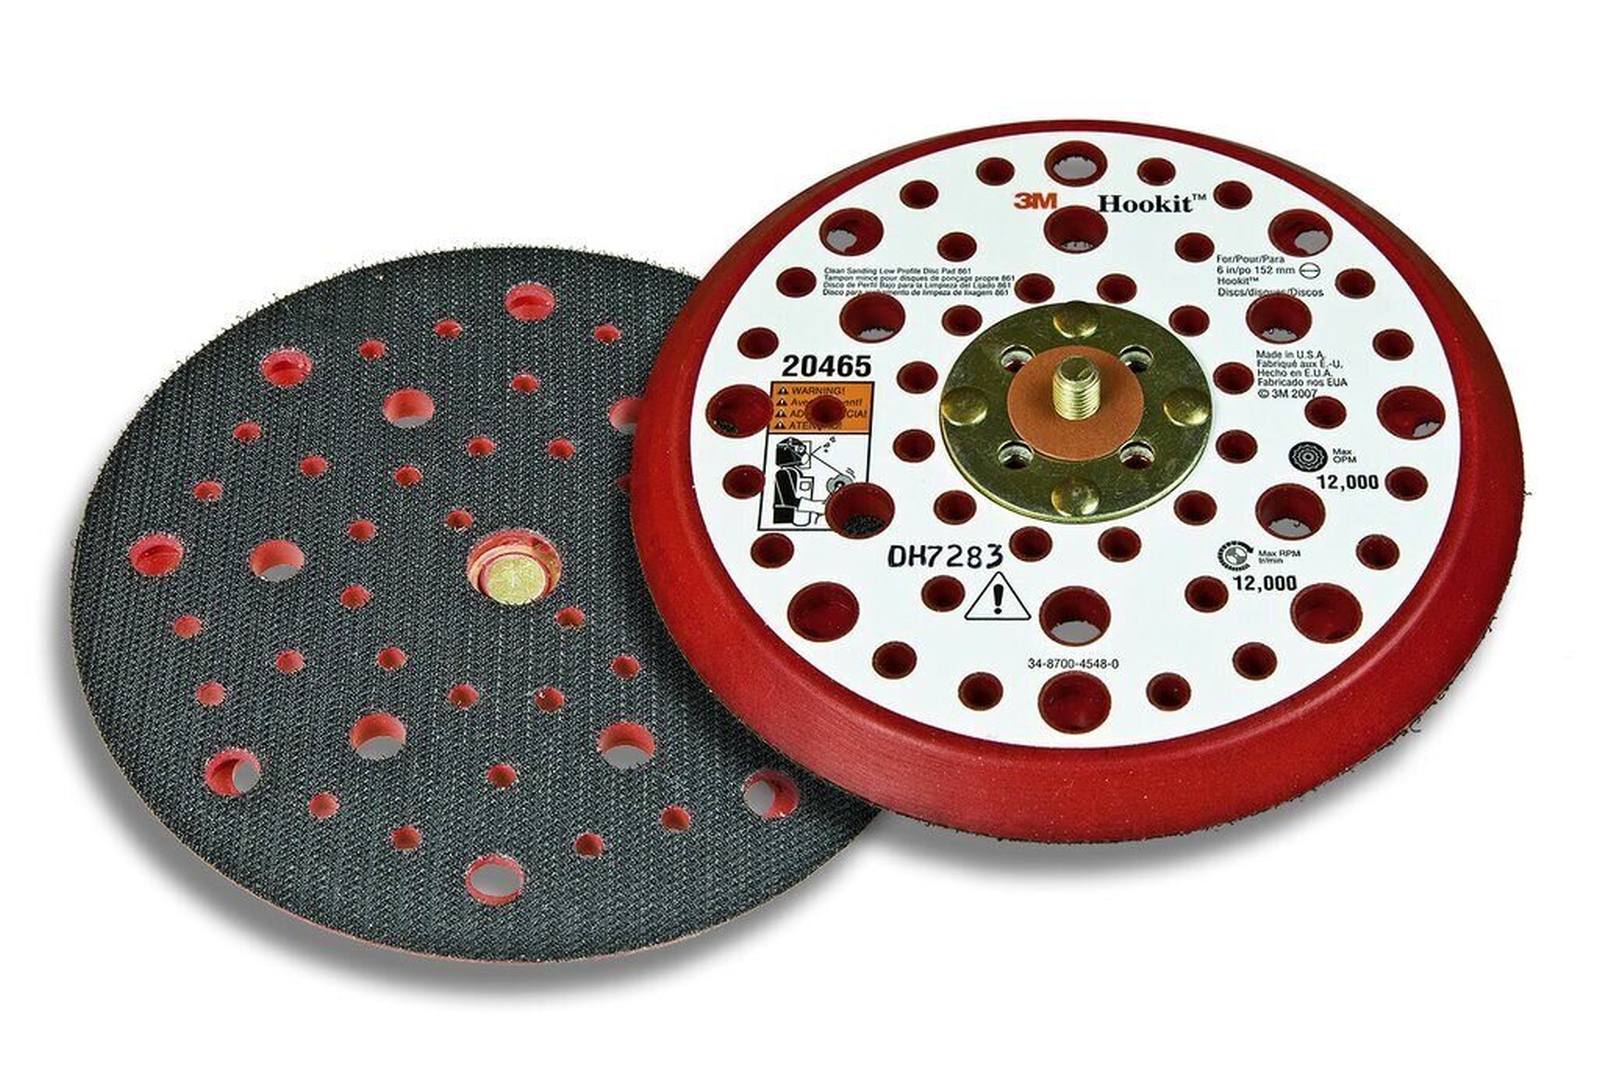 3M Xtract Low profile backing pad, 150 mm x 9.5 mm x 7.9 mm, perforated 52 times